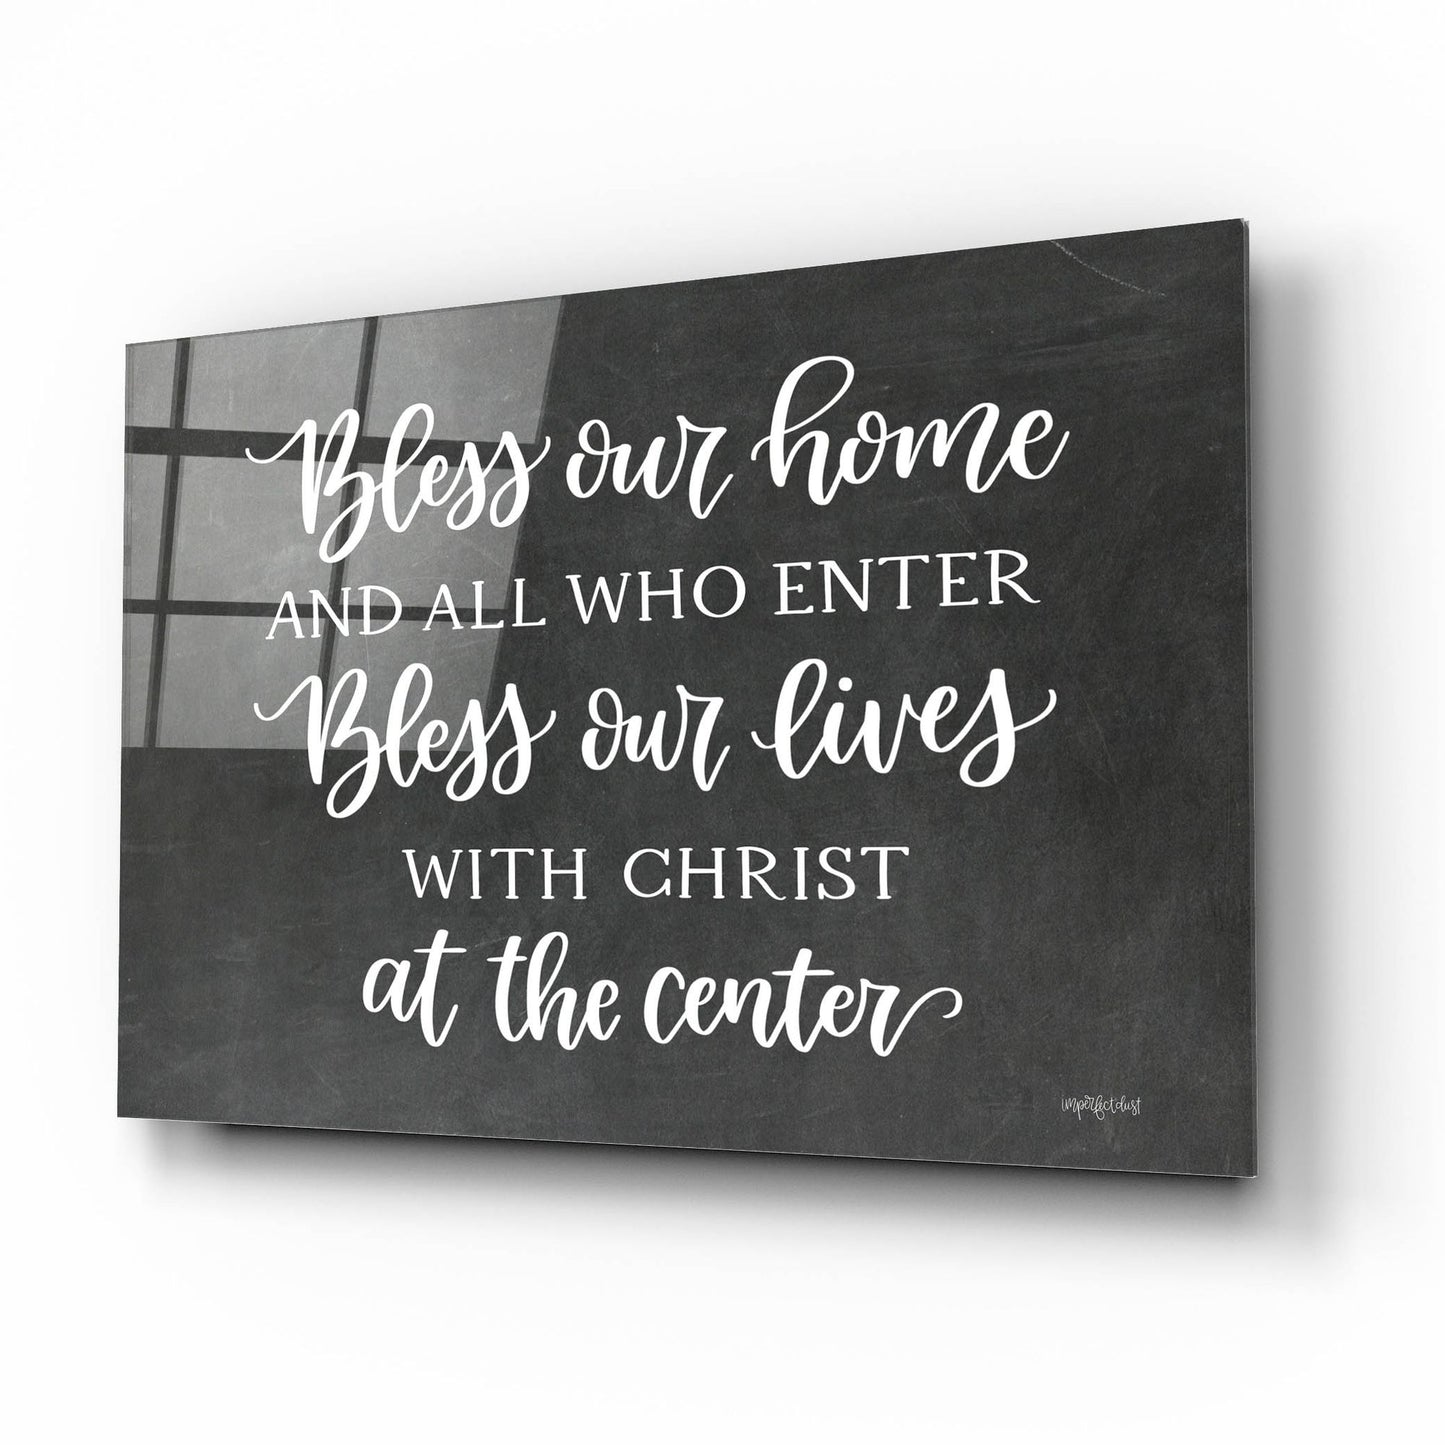 Epic Art 'Bless Our Home' by Imperfect Dust, Acrylic Glass Wall Art,16x12